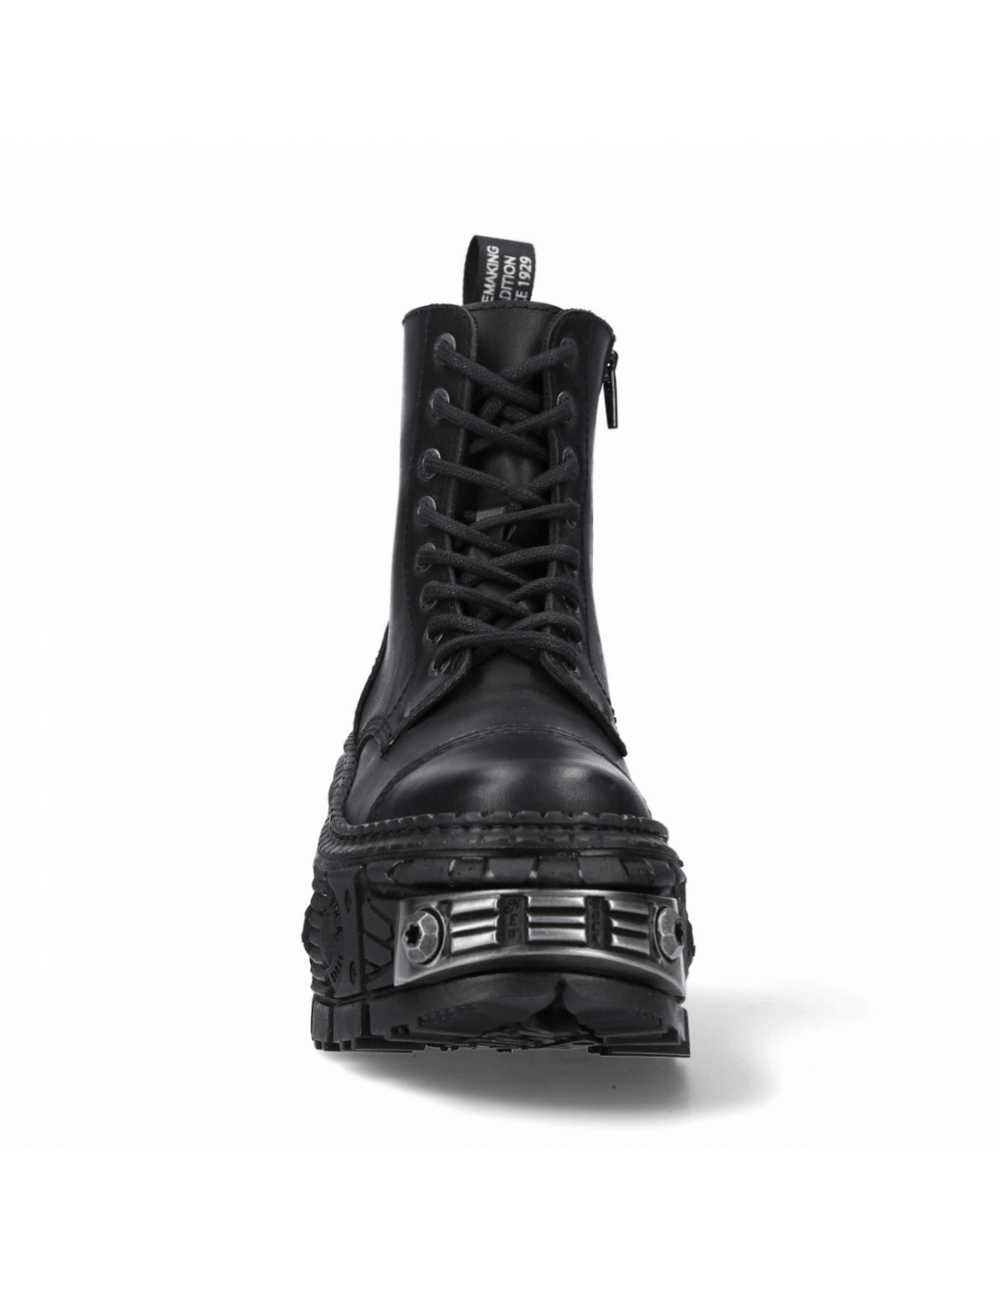 NEW ROCK Unisex Zipper Ankle Boots with Metallic Pieces